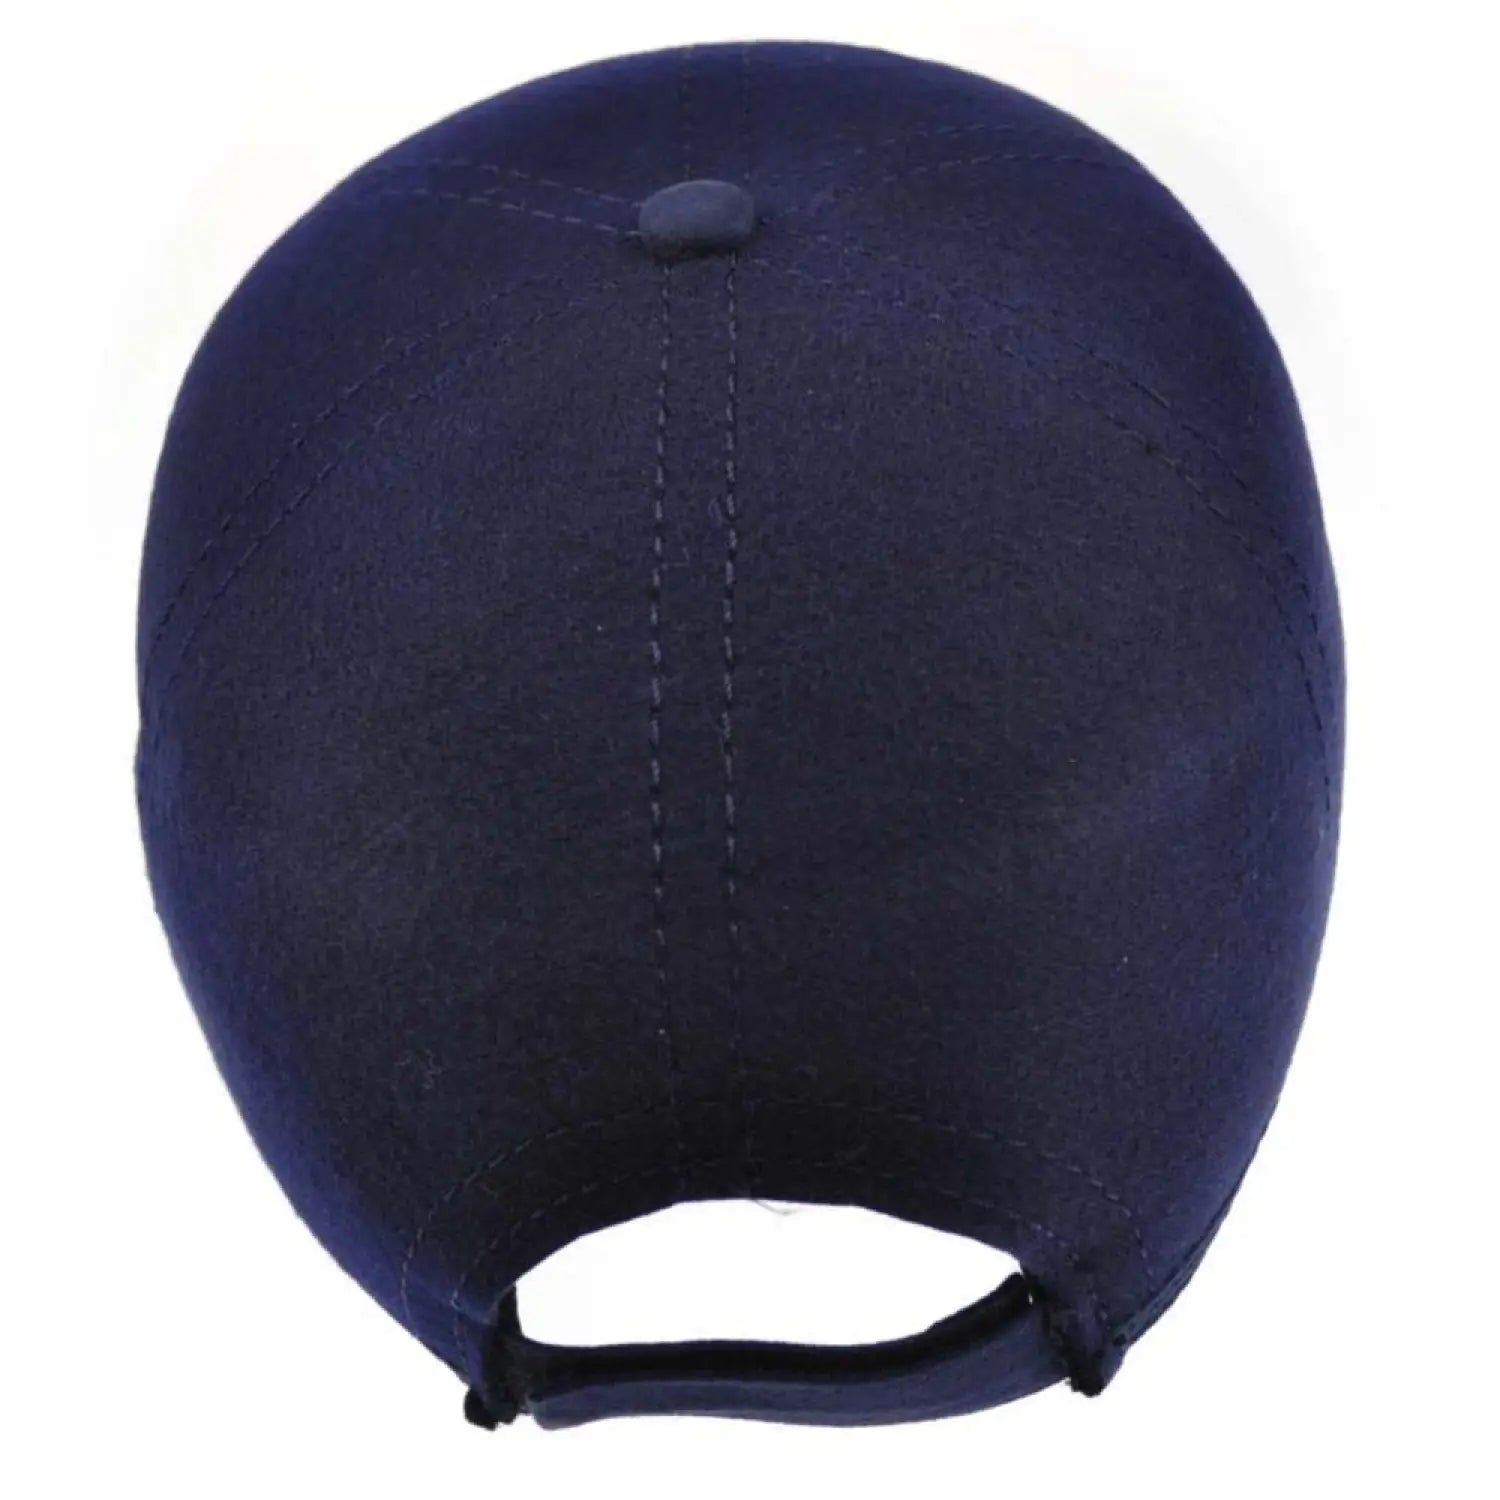 Chic wool felt baseball cap with navy and white stitching for unisex retro design